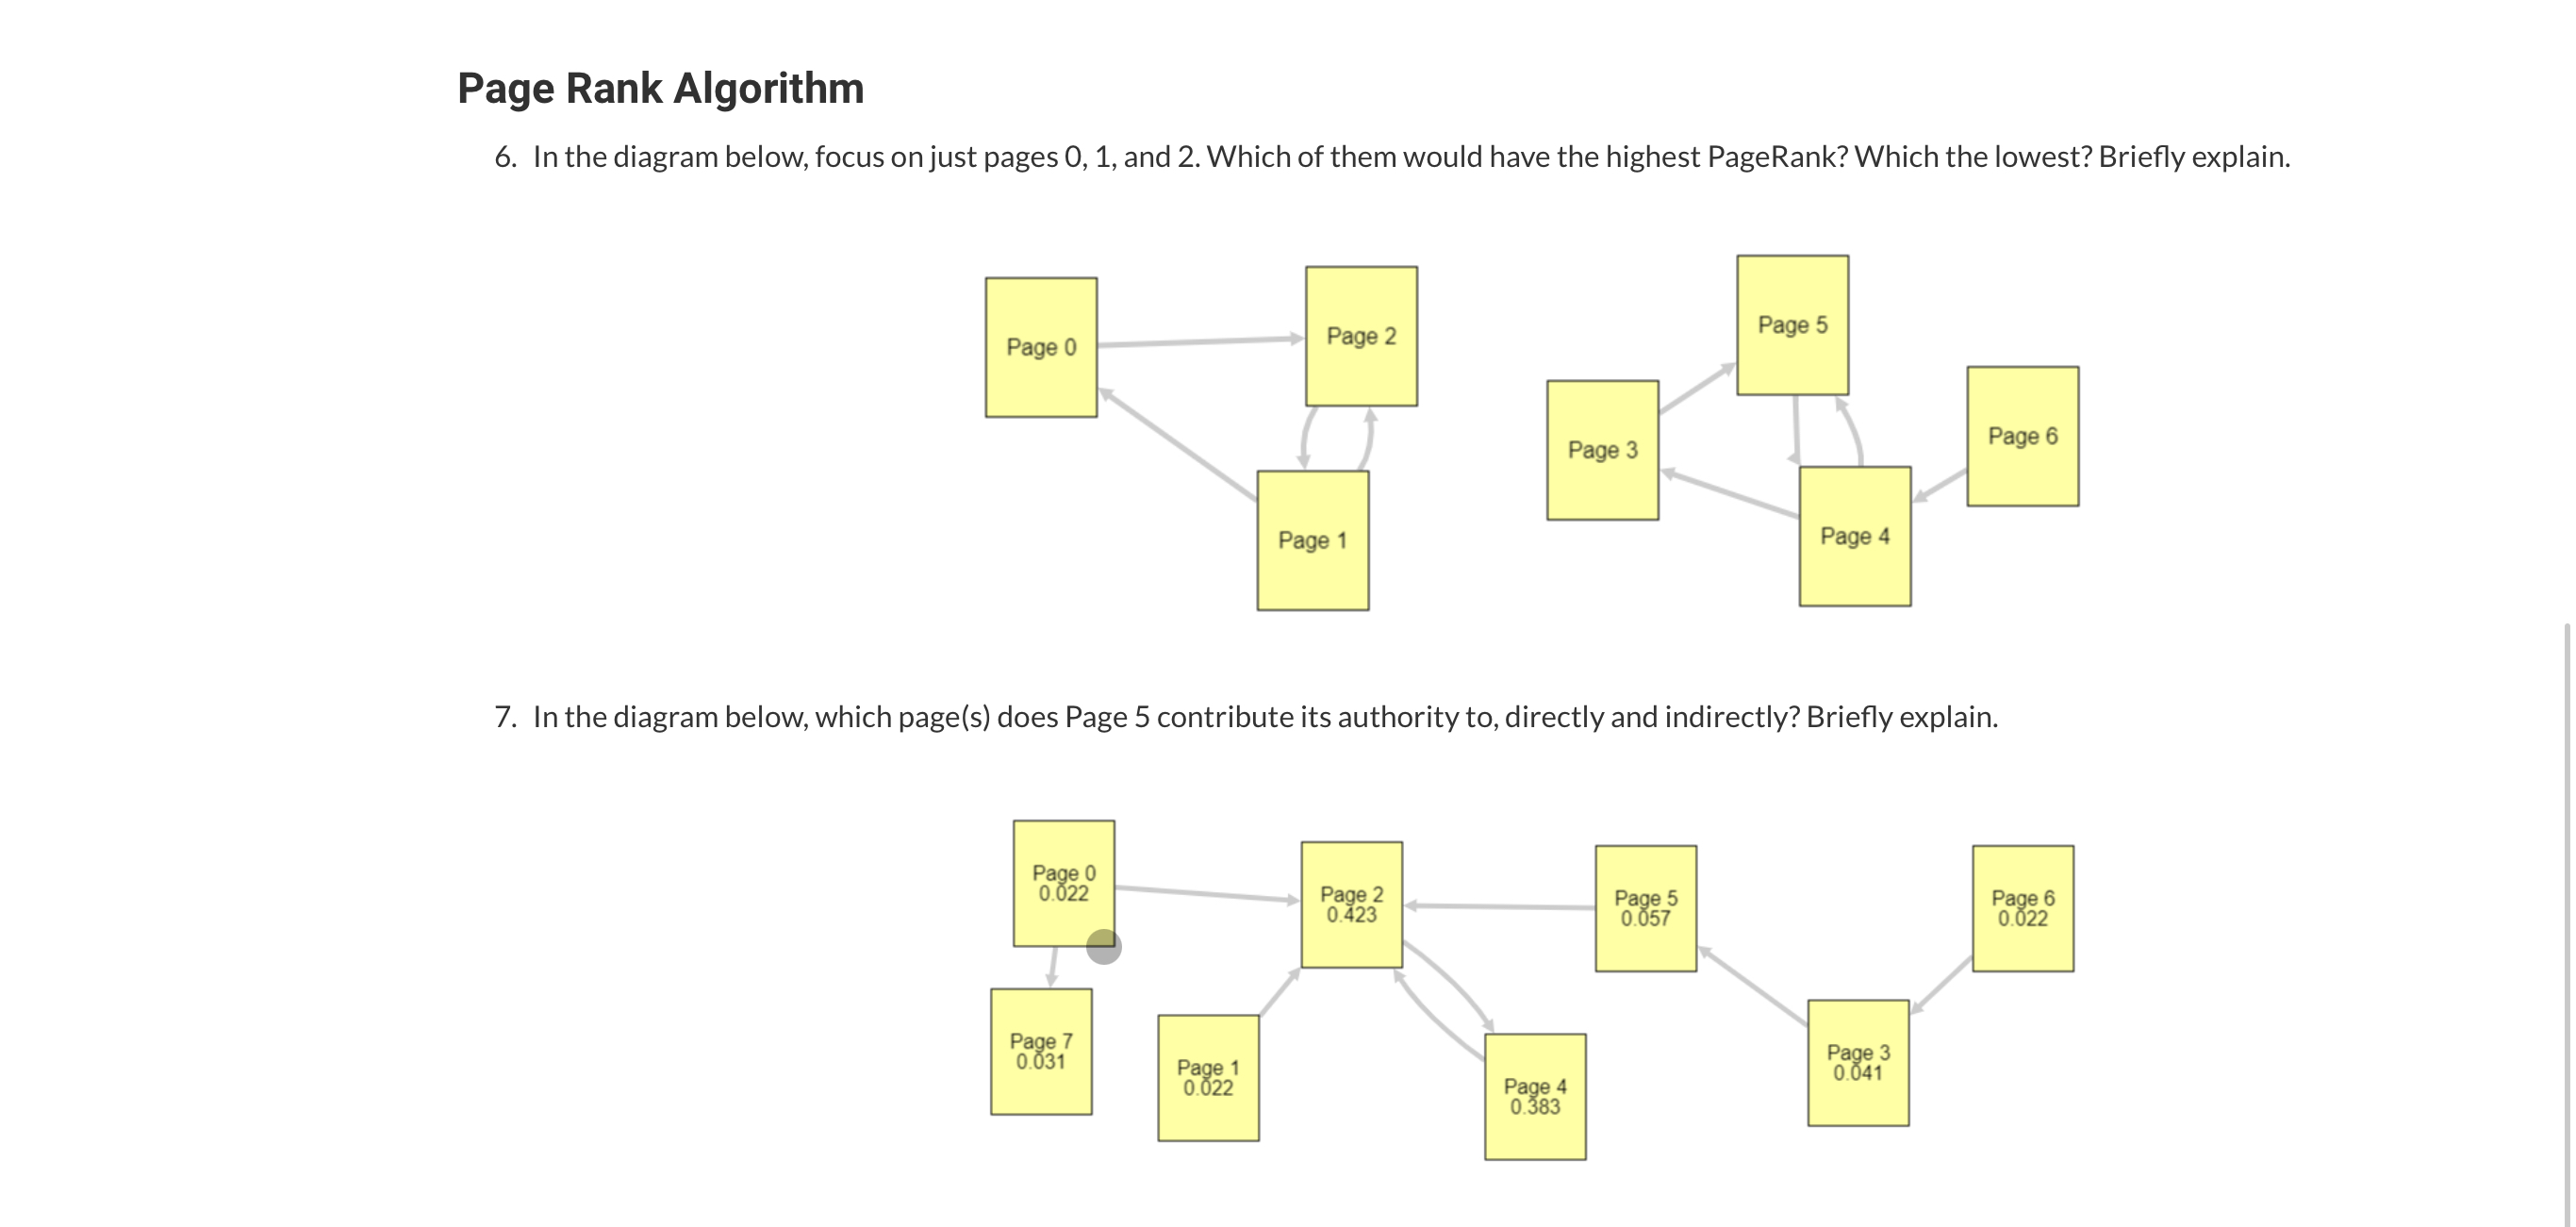 Page Rank Algorithm 6. In the diagram below, focus on just pages 0, 1, and 2. Which of them would have the